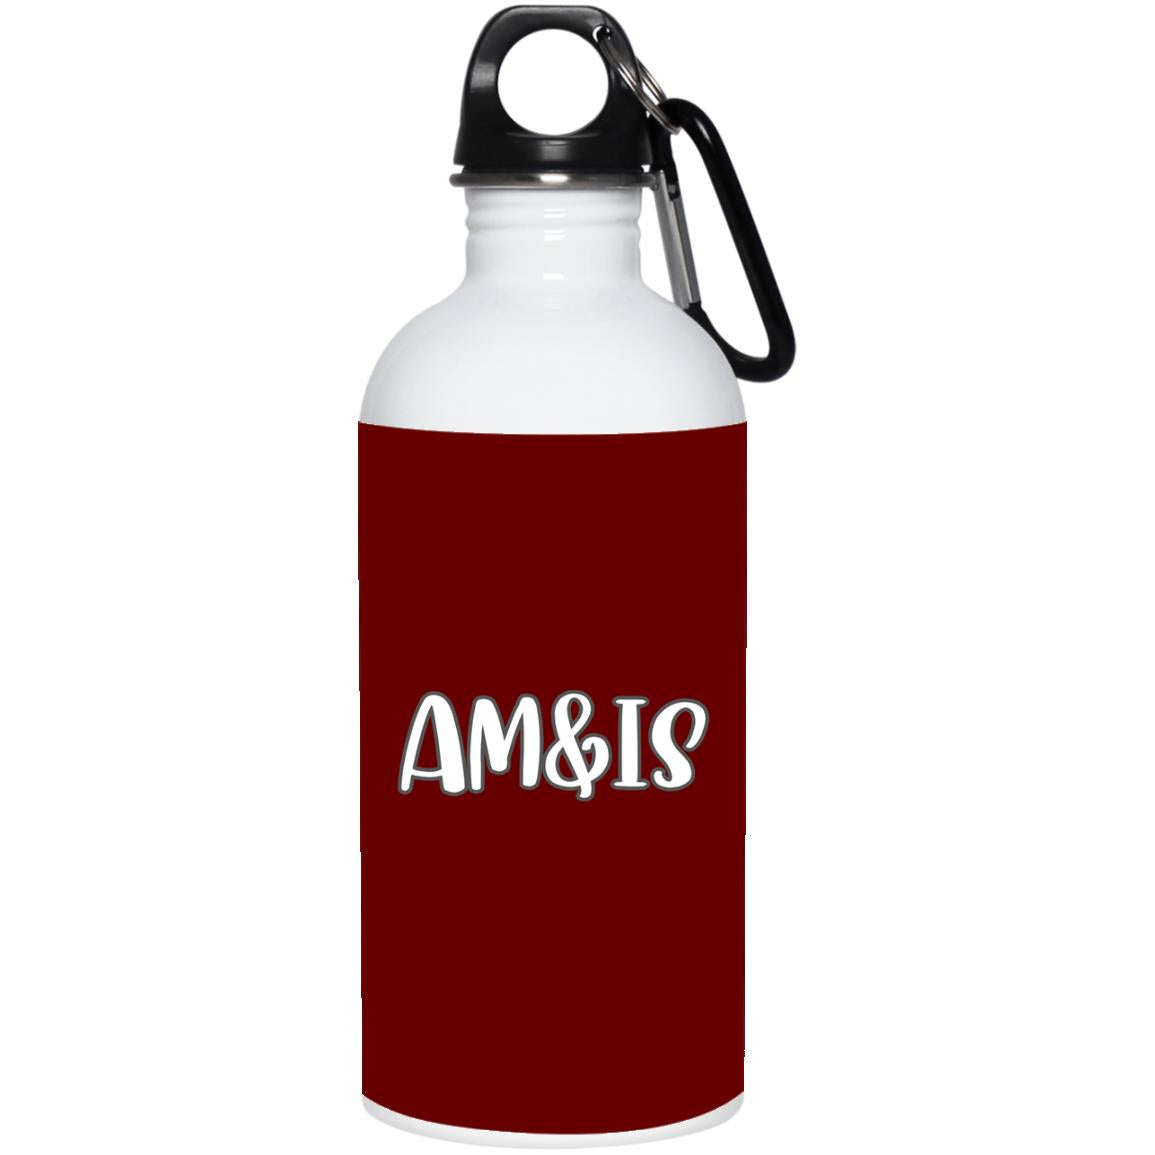 MAROON ONE SIZE - AM&IS Activewear 20 oz. Stainless Steel Water Bottle - Drinkware at TFC&H Co.